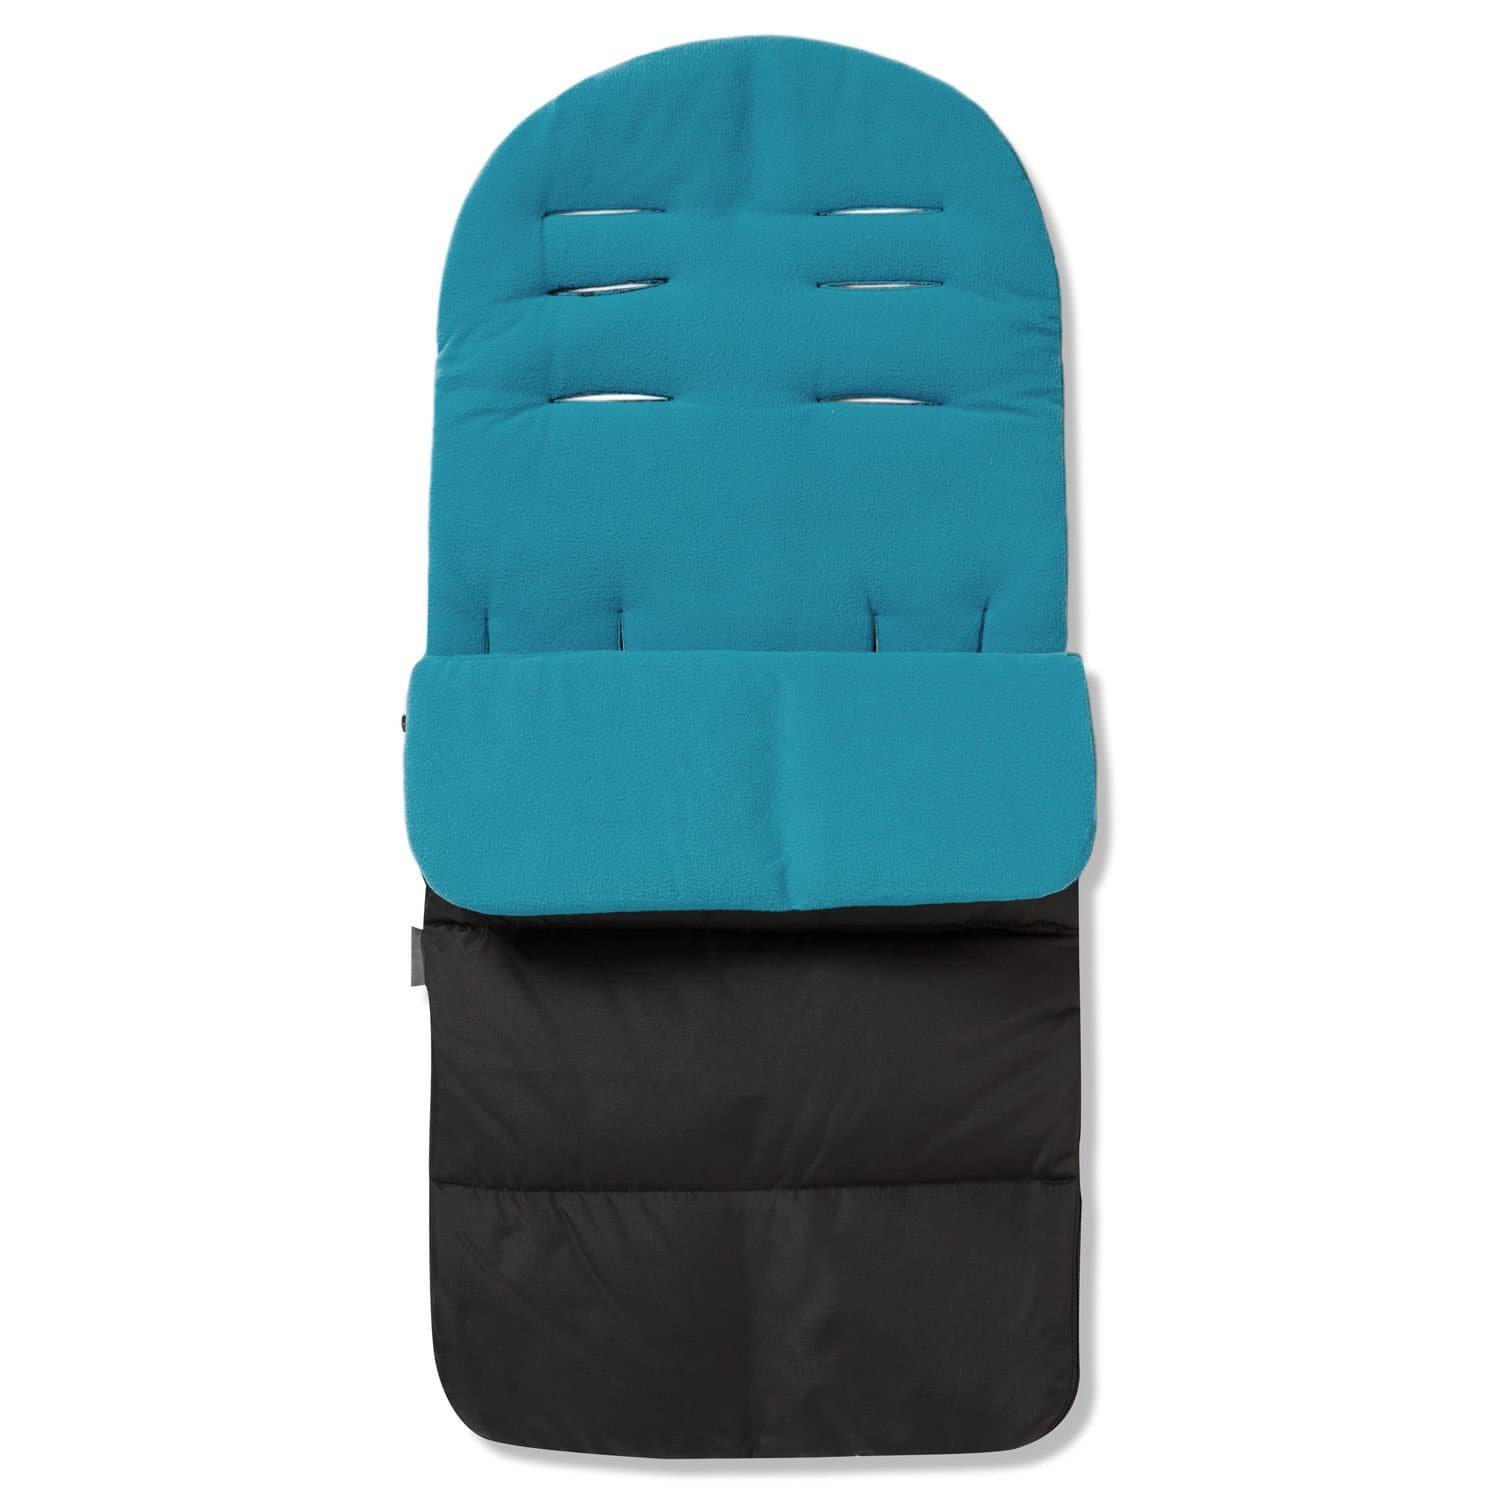 Premium Footmuff / Cosy Toes Compatible with Greentom - Ocean Blue / Fits All Models | For Your Little One